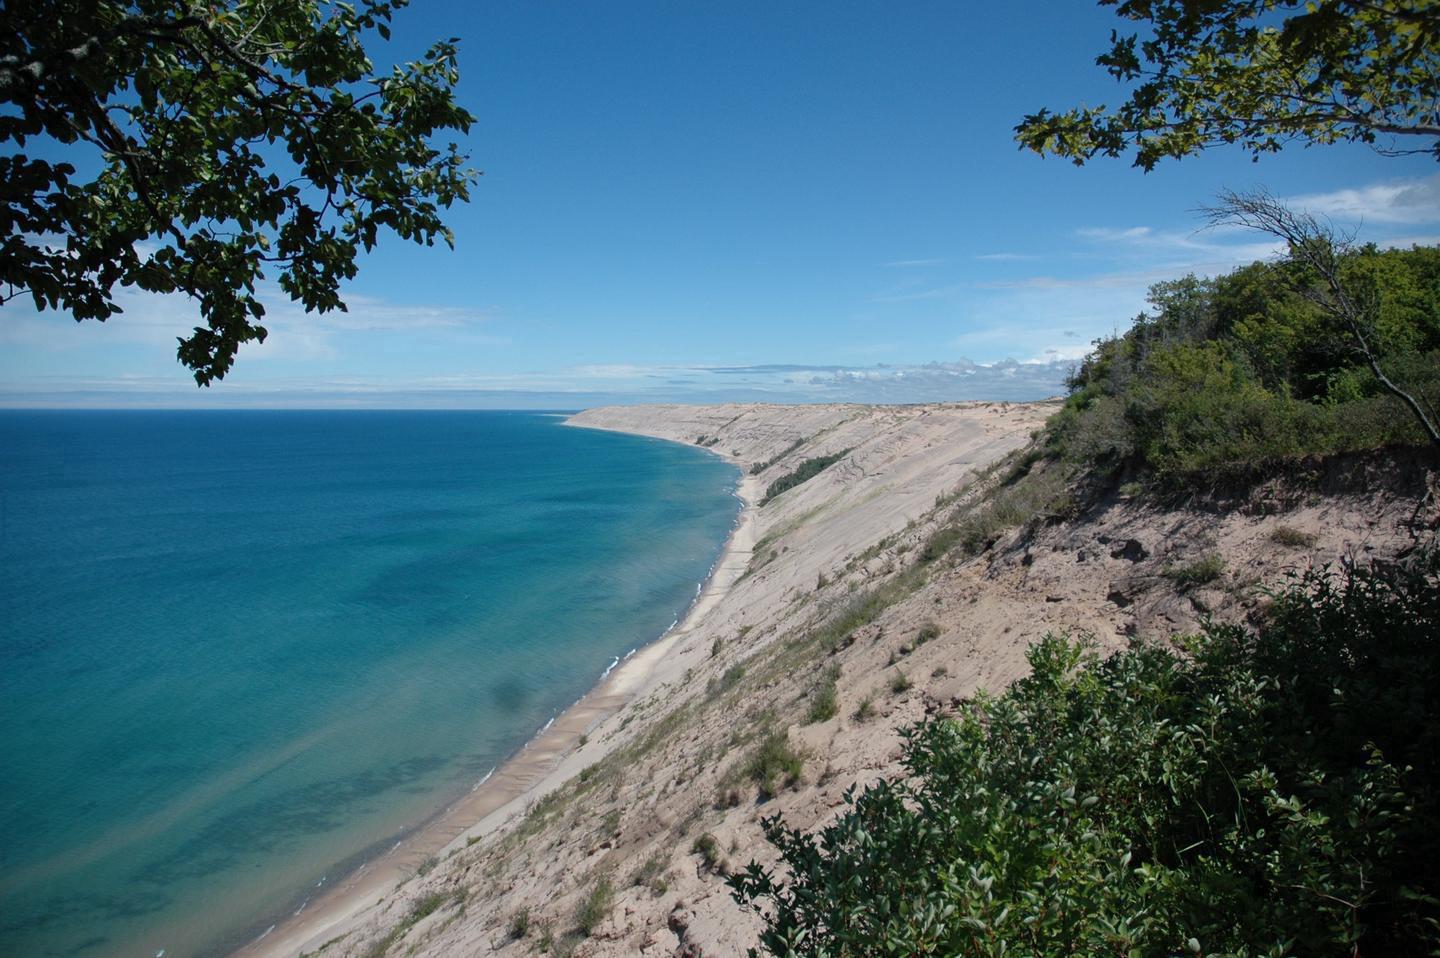 Grand Sable DunesThe Grand Sable Dunes rise up 300 feet from Lake Superior.